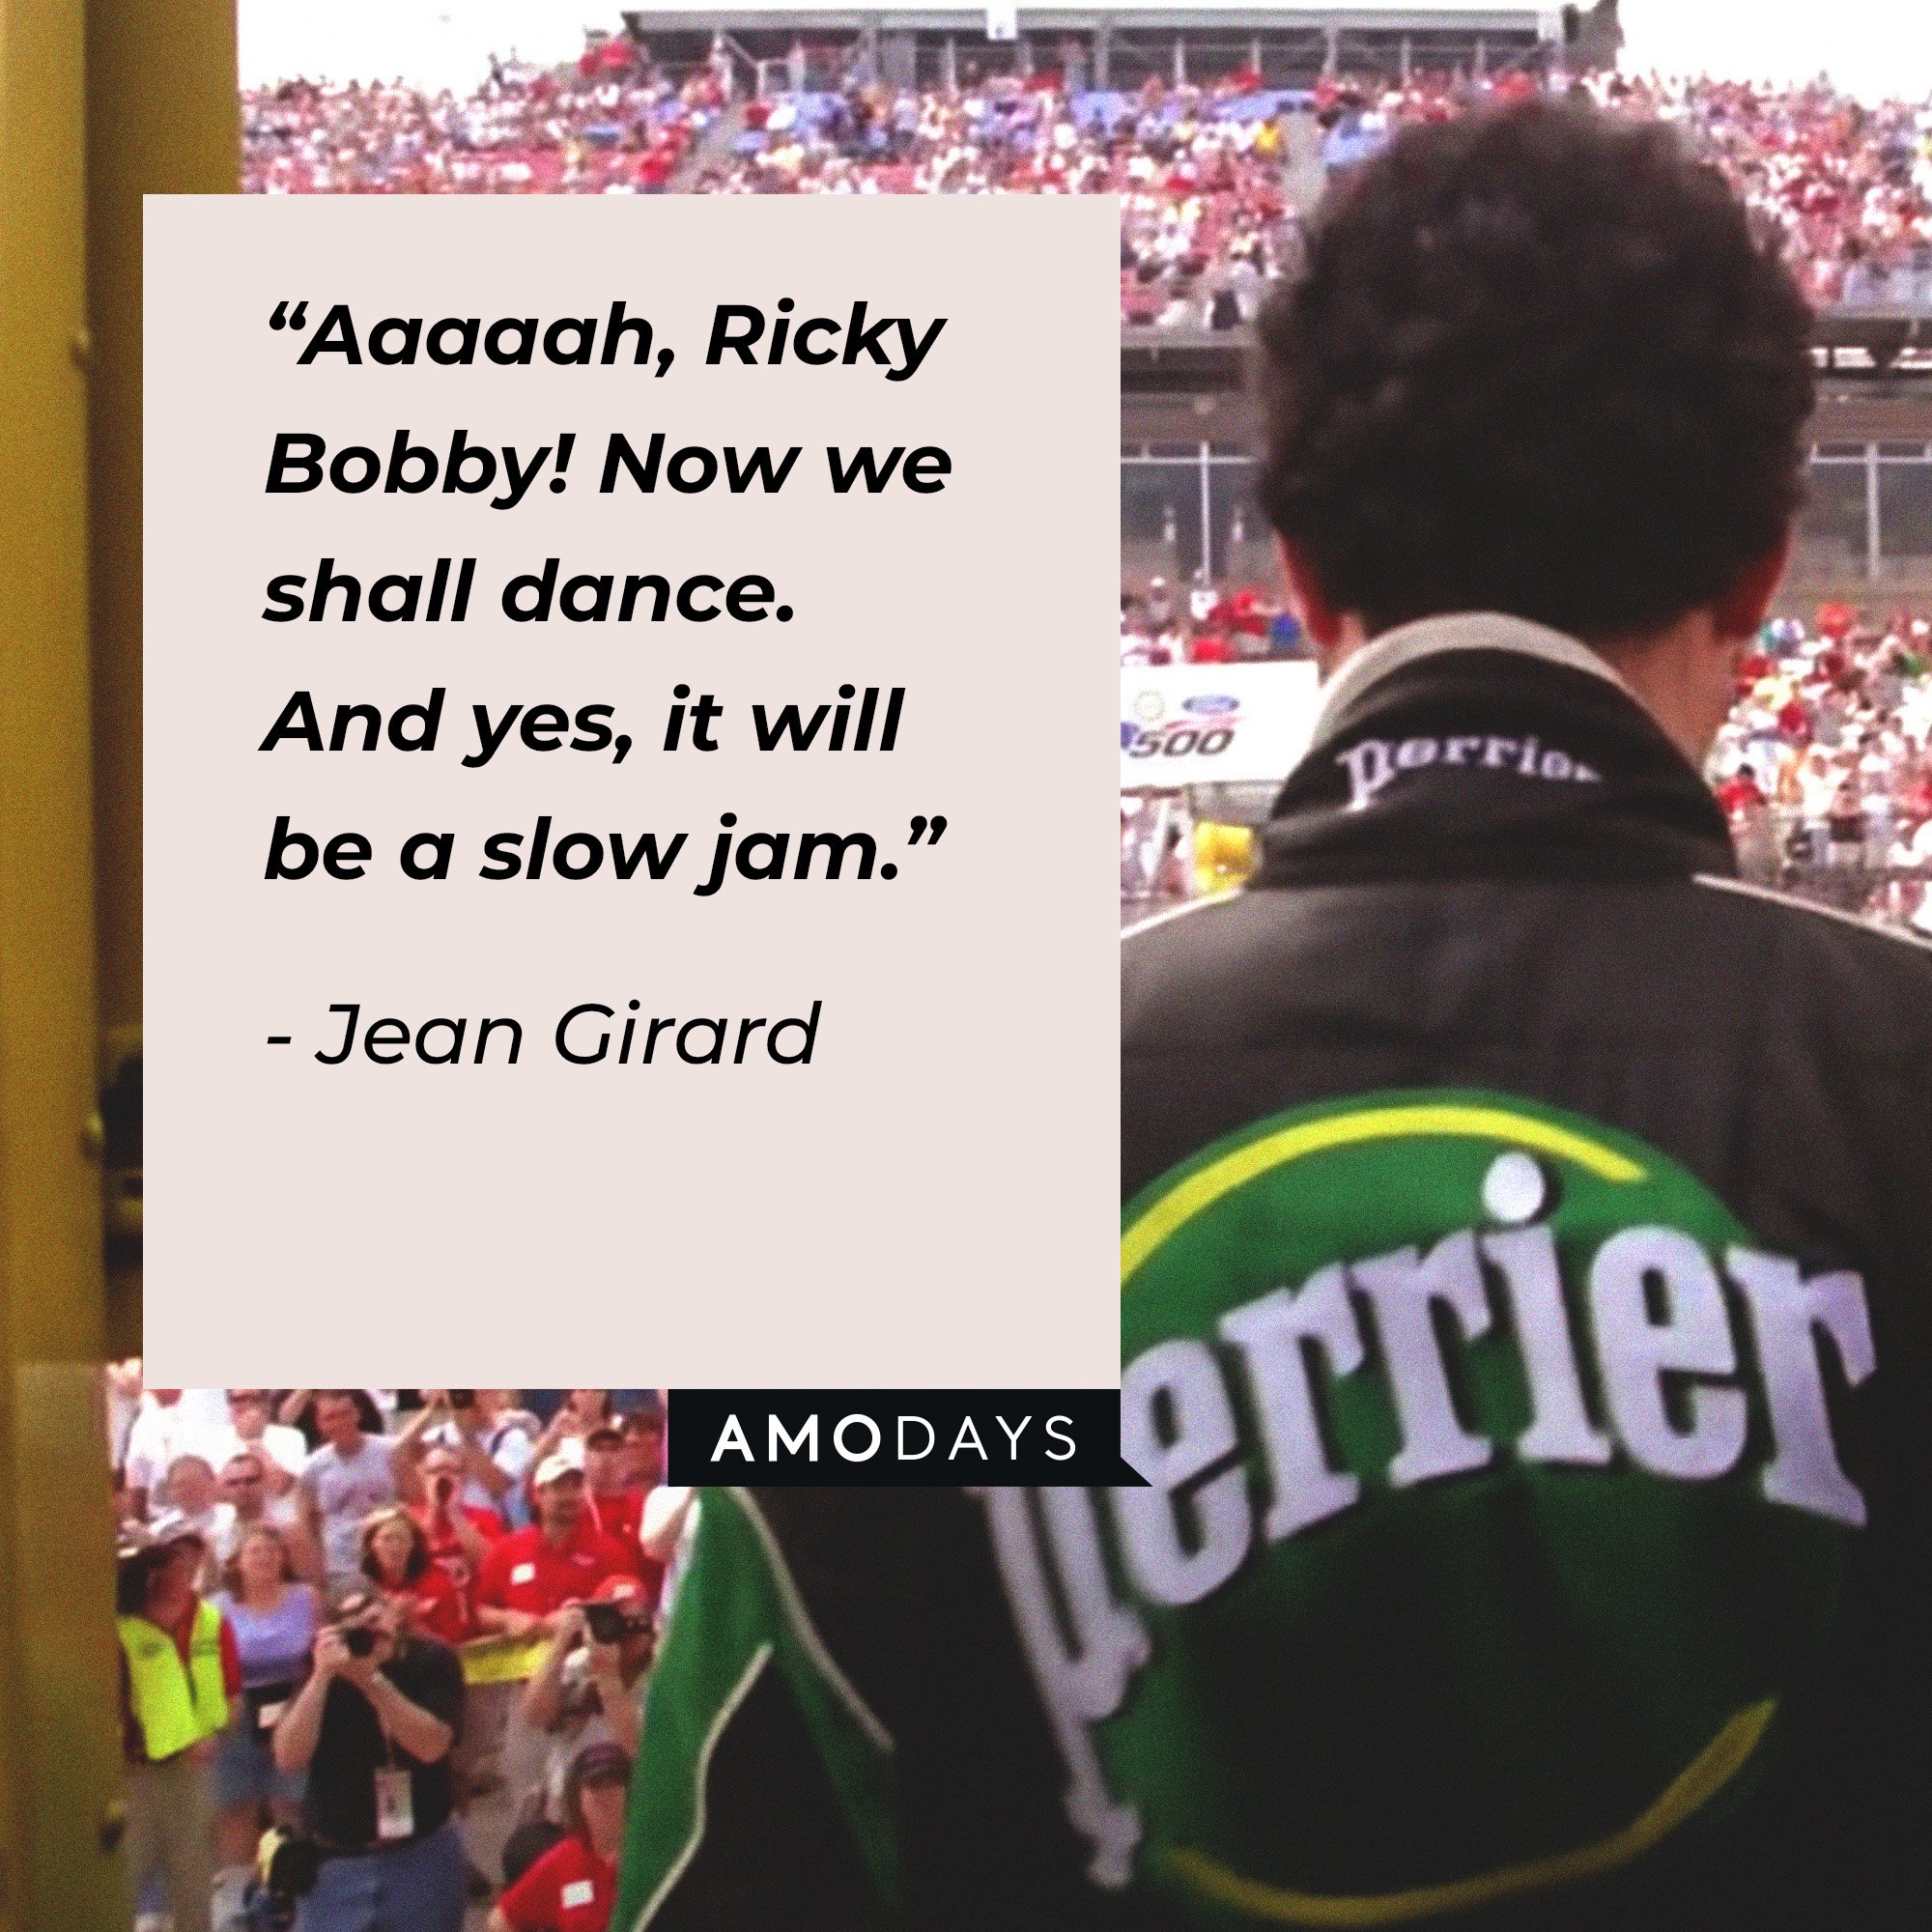 Jean Girard’s quote: “Aaaaah, Ricky Bobby! Now we shall dance. And yes, it will be a slow jam.” | Image: AmoDays